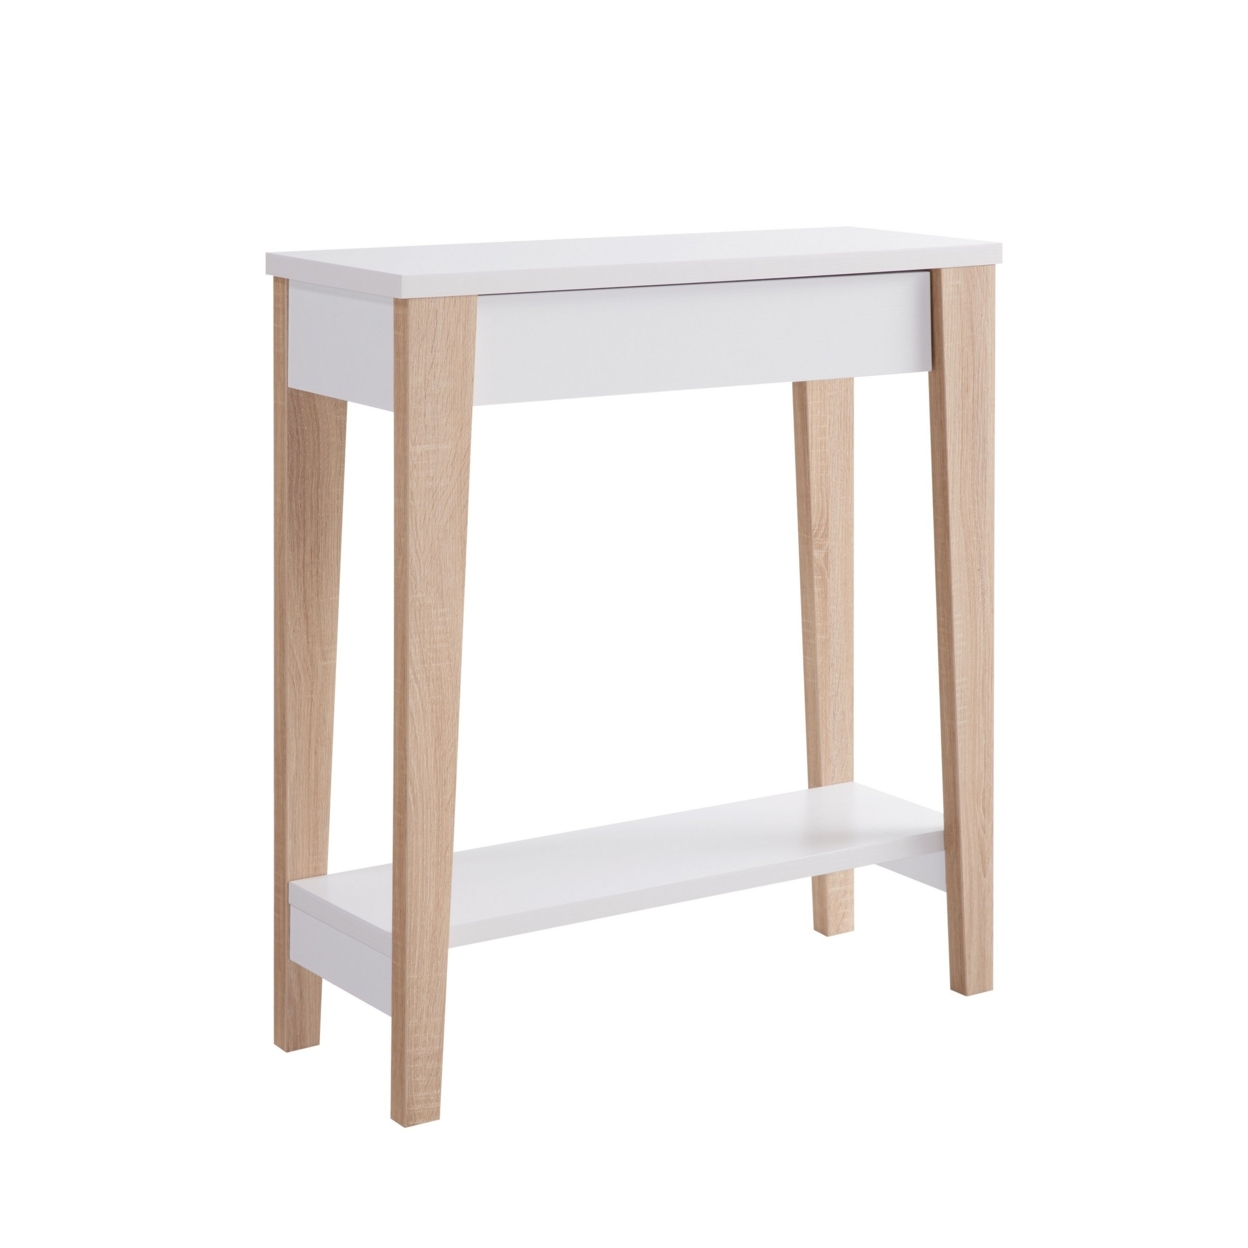 34 Inch Console Table With Drawer And Shelf, Tapered Legs, White, Brown- Saltoro Sherpi